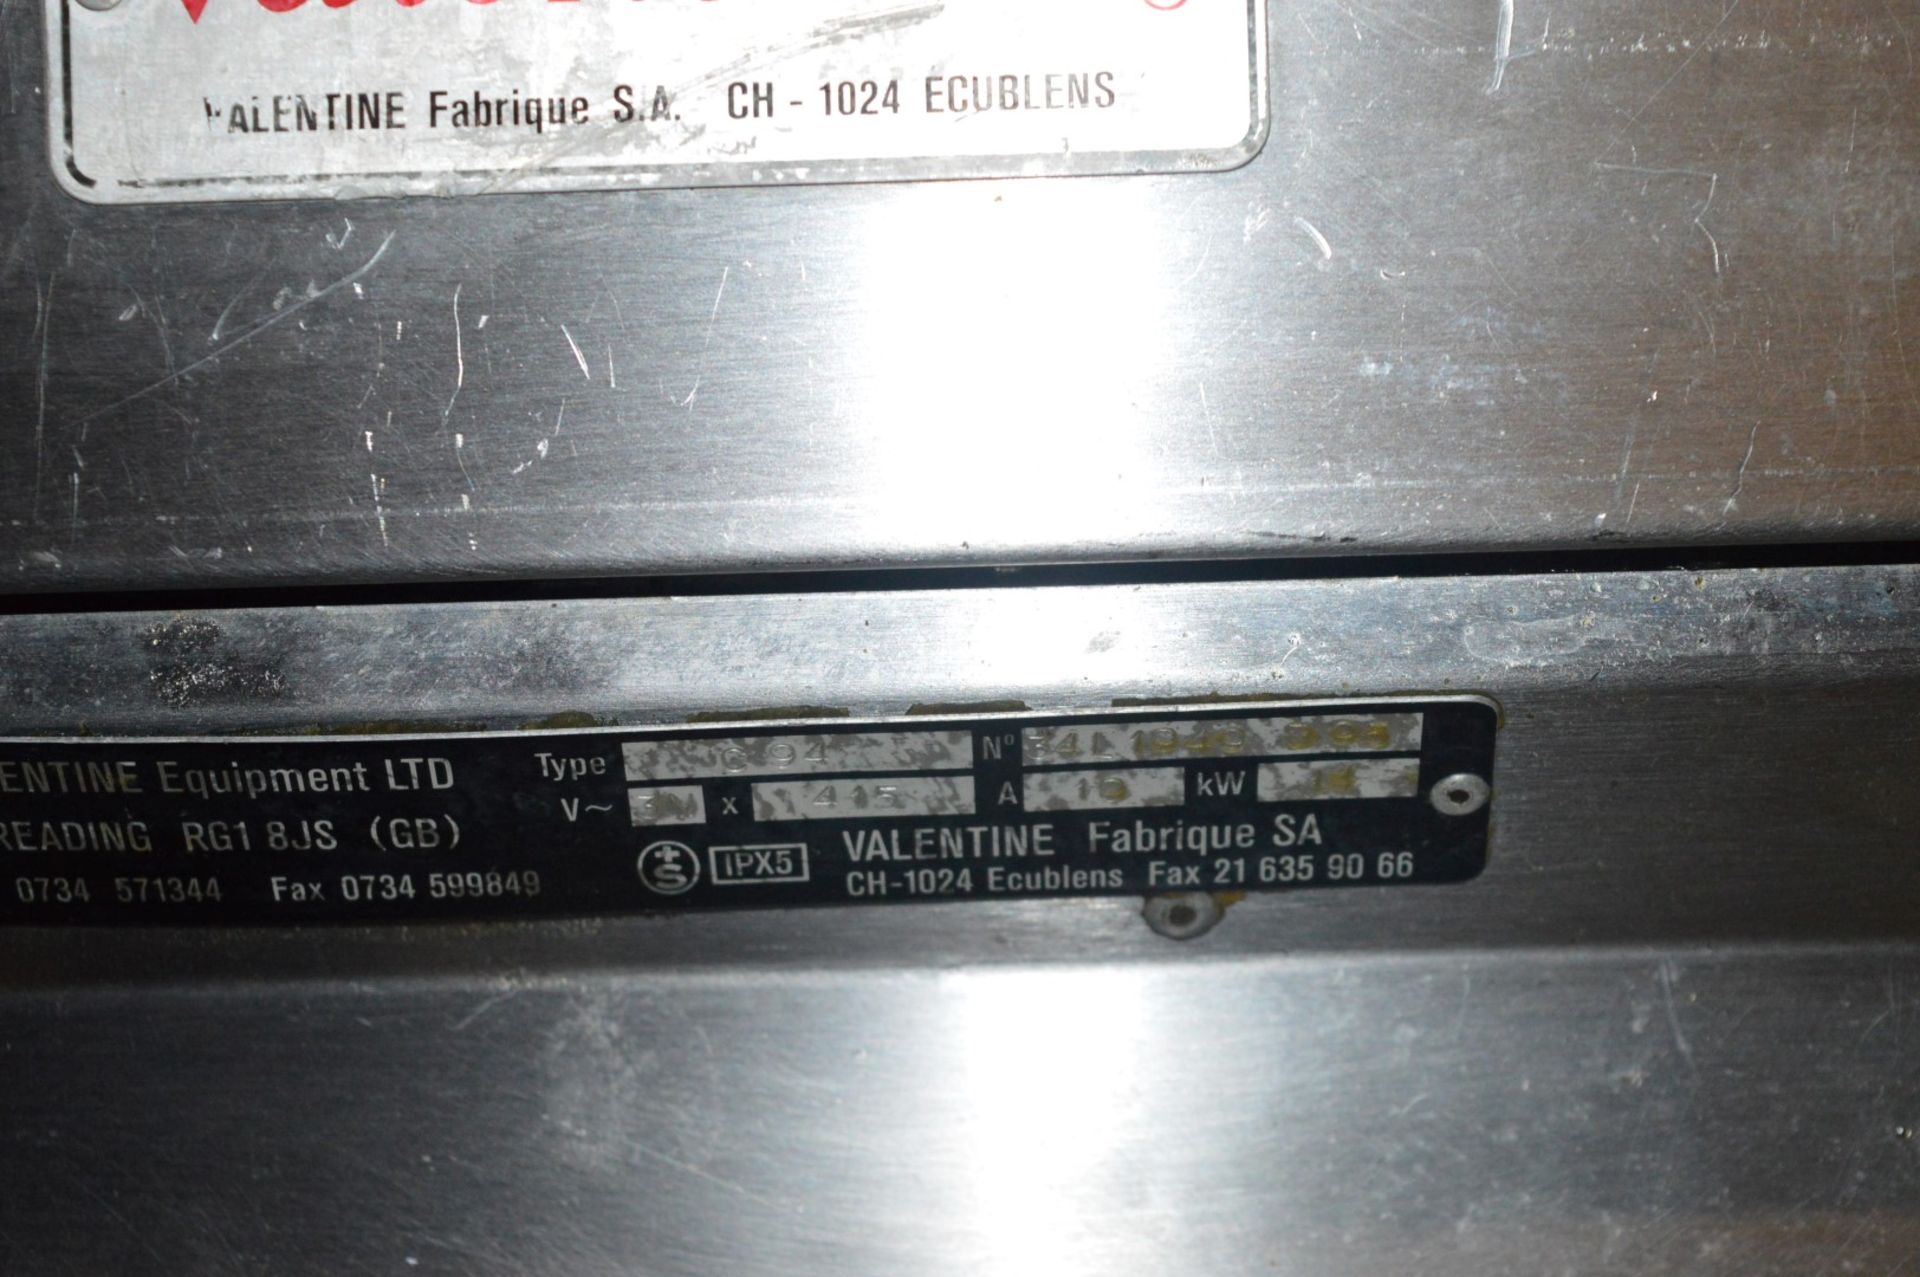 1 x Valentine VMC 1 Stainless Steel Freestanding Fryer - 3 Phase - CL232 - Ref JP505 - Location: - Image 5 of 7